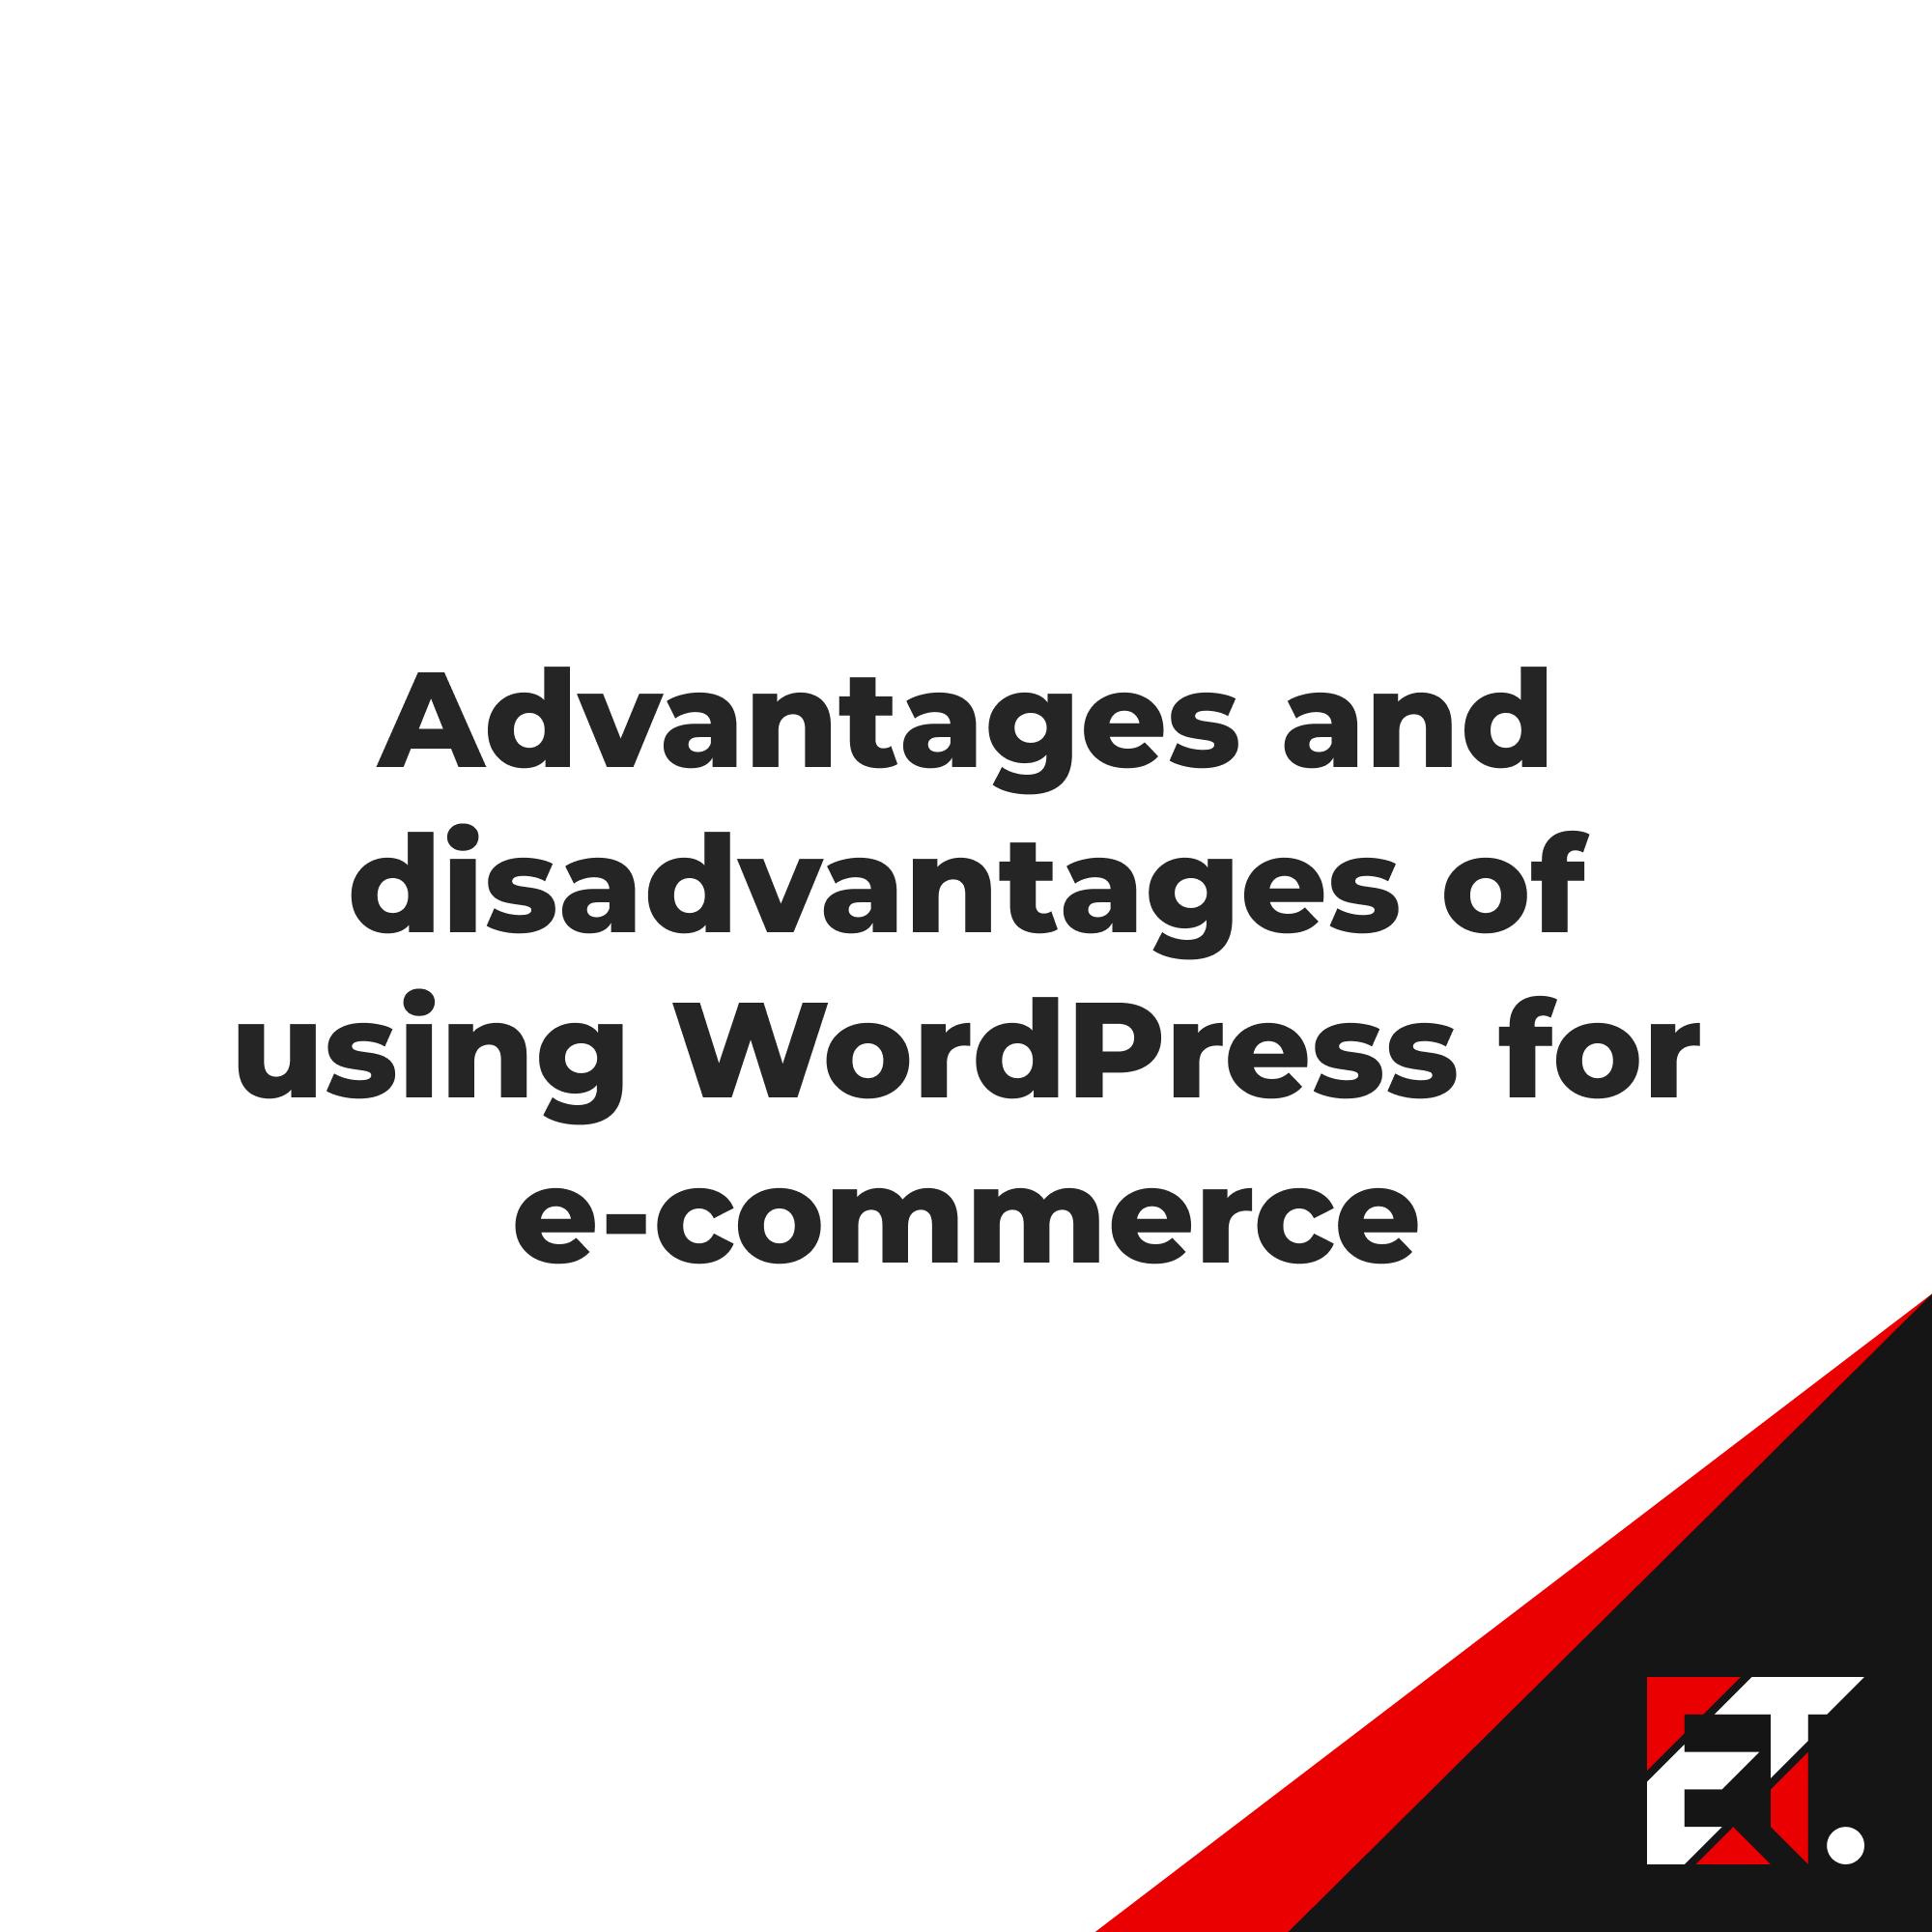 Advantages and disadvantages of using WordPress for e-commerce